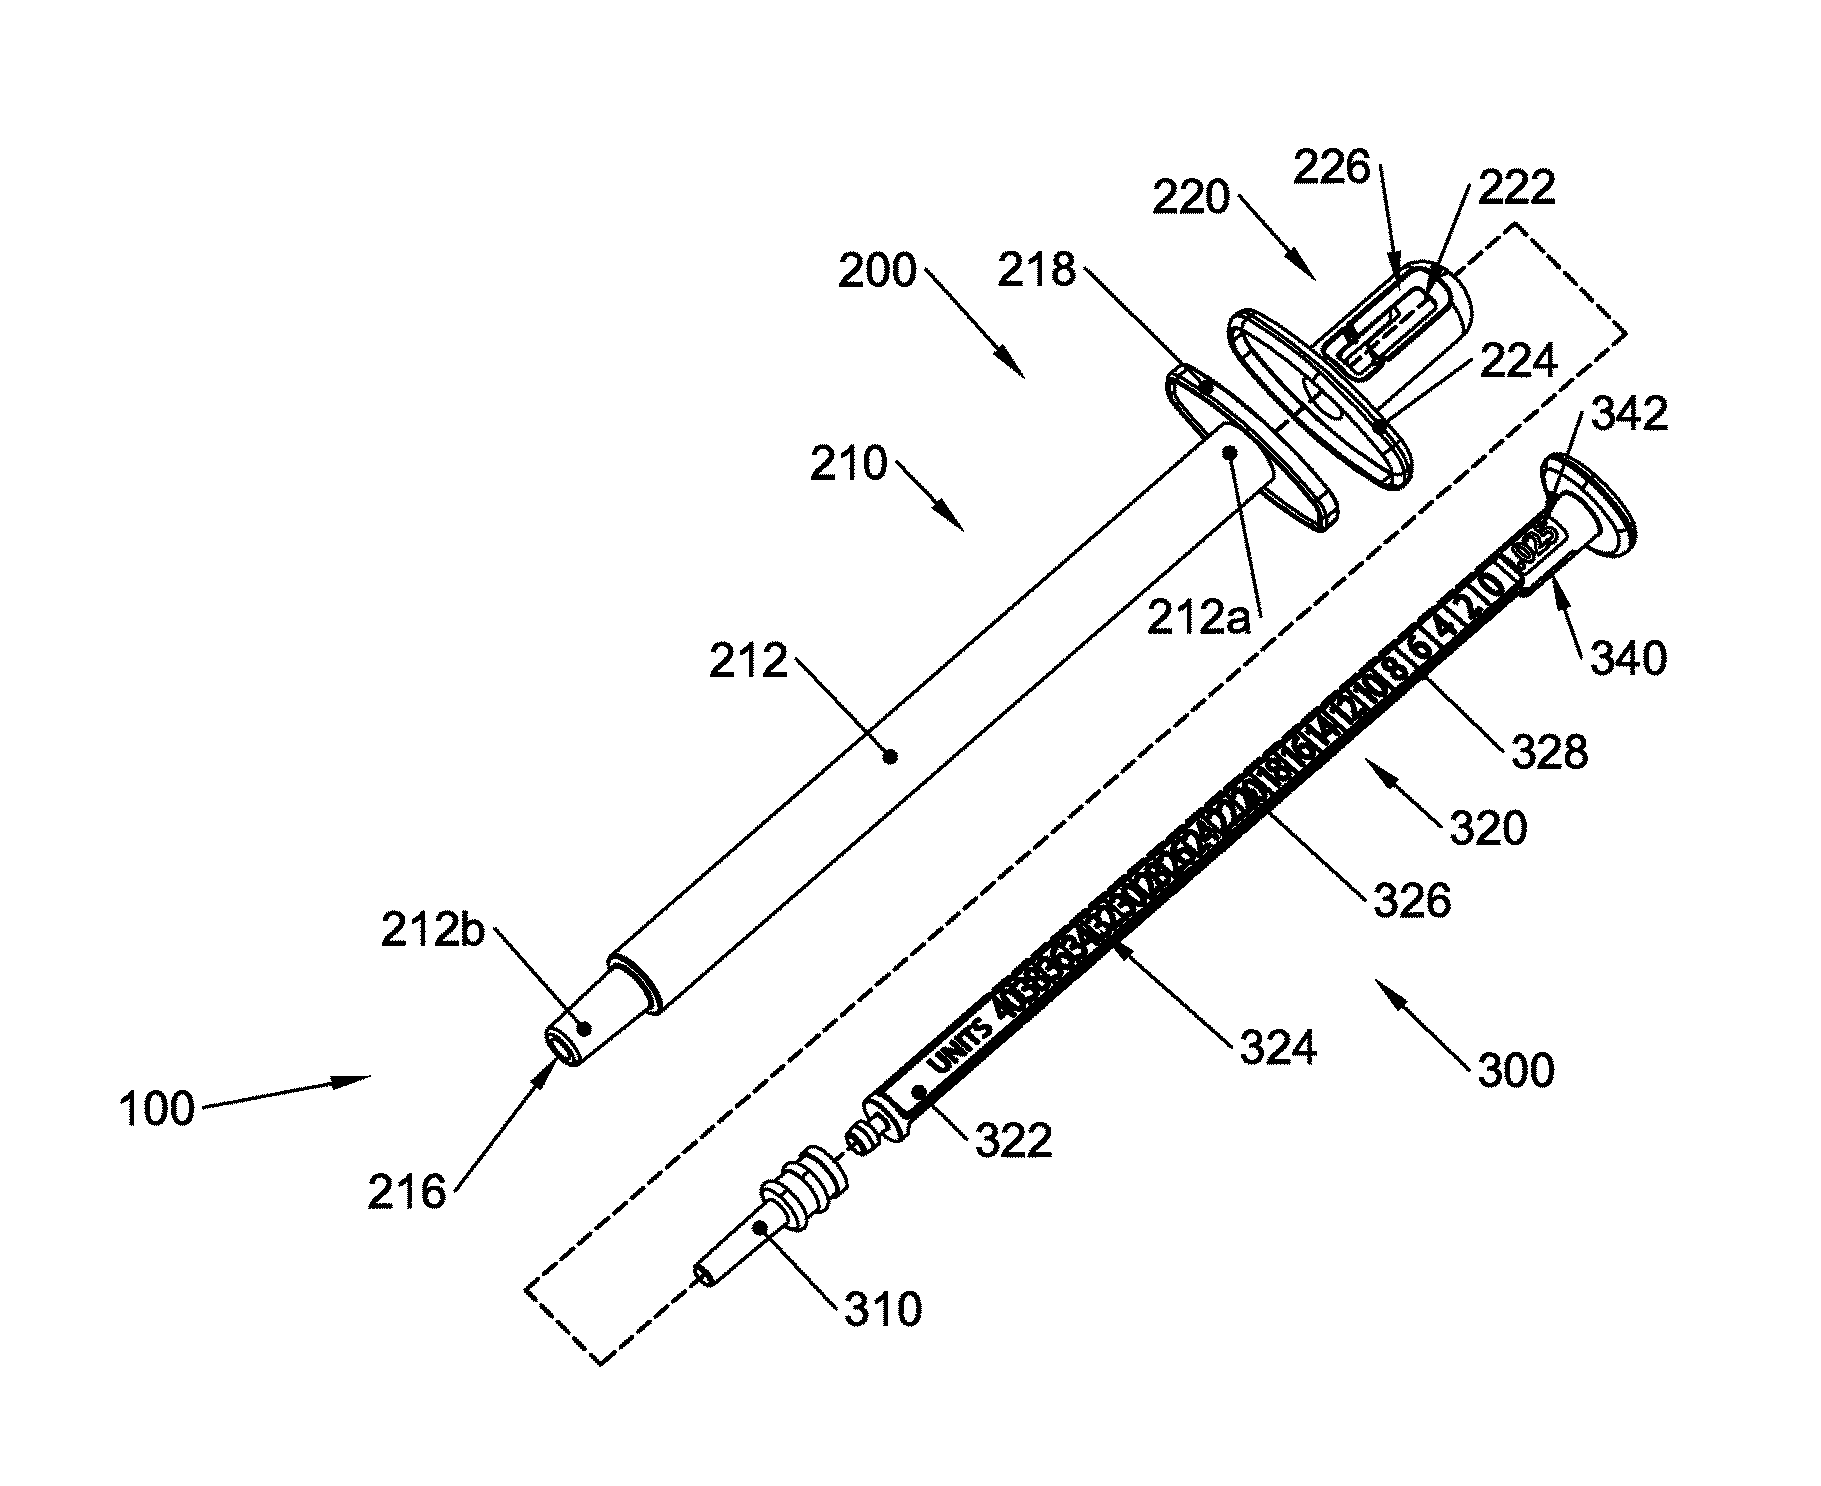 Syringe with alternatively selectable graduations